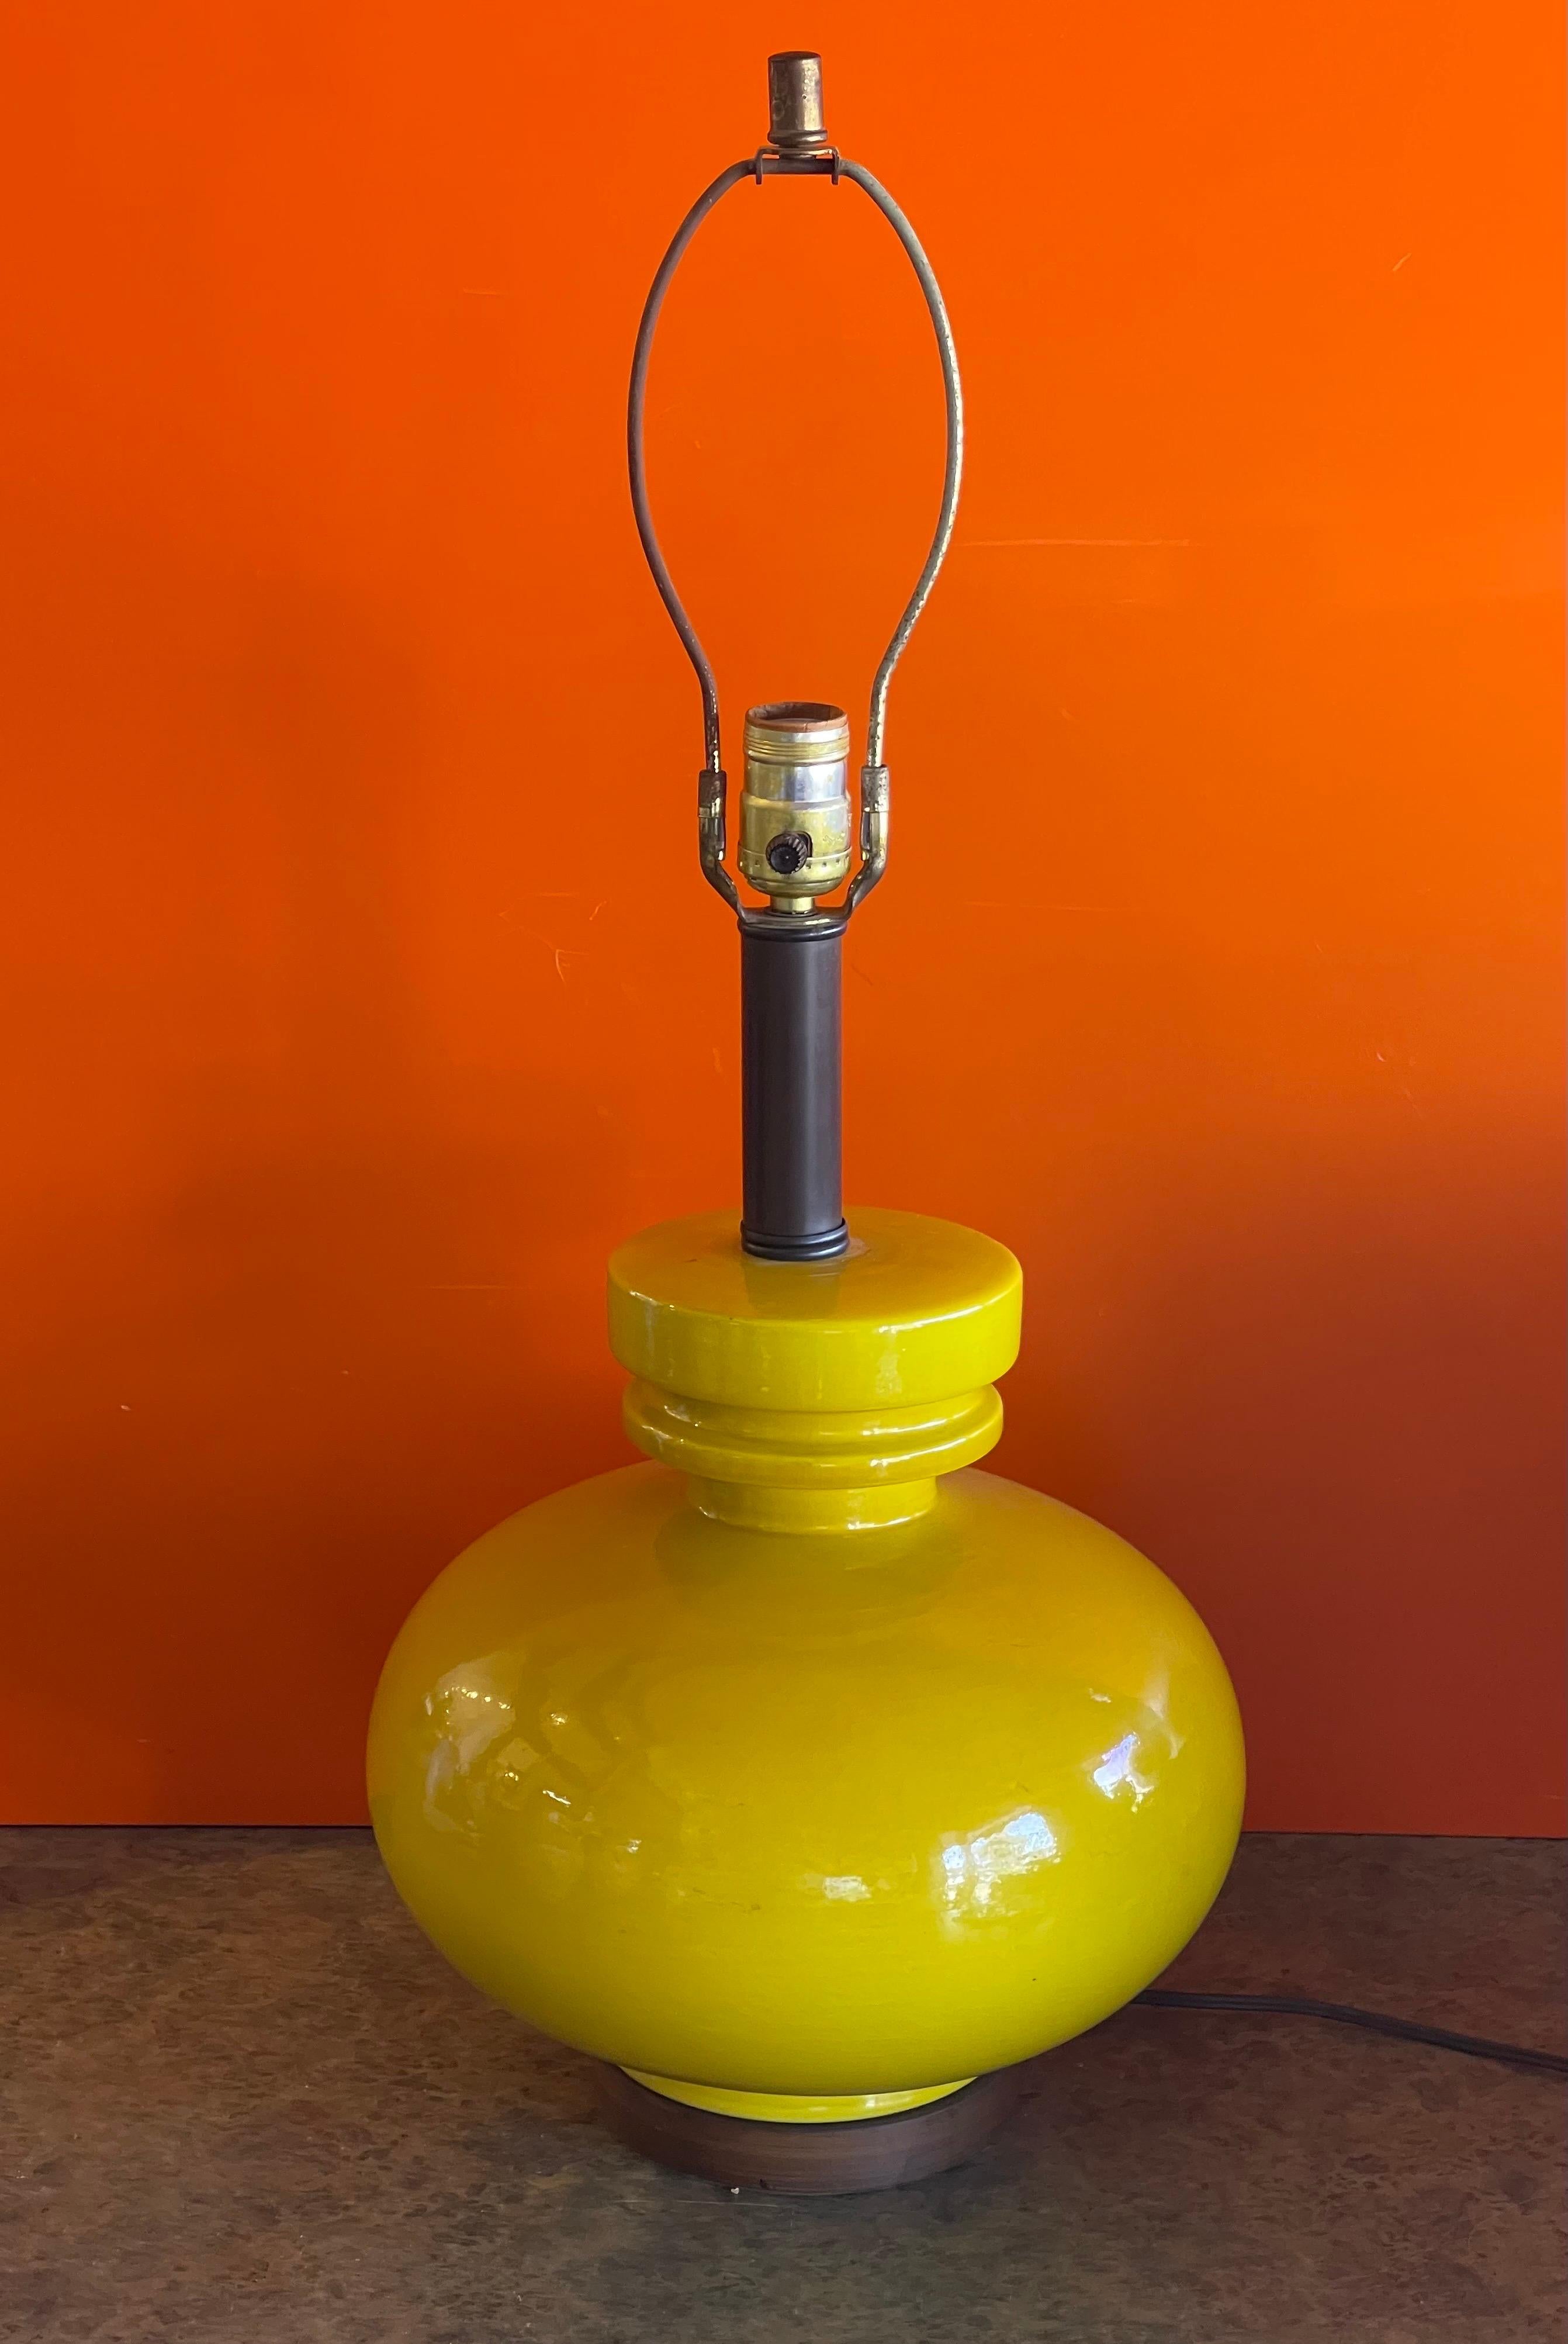 A bright yellow glazed ceramic studio pottery table lamp with walnut base, circa 1960s. The lamp measures 11.5